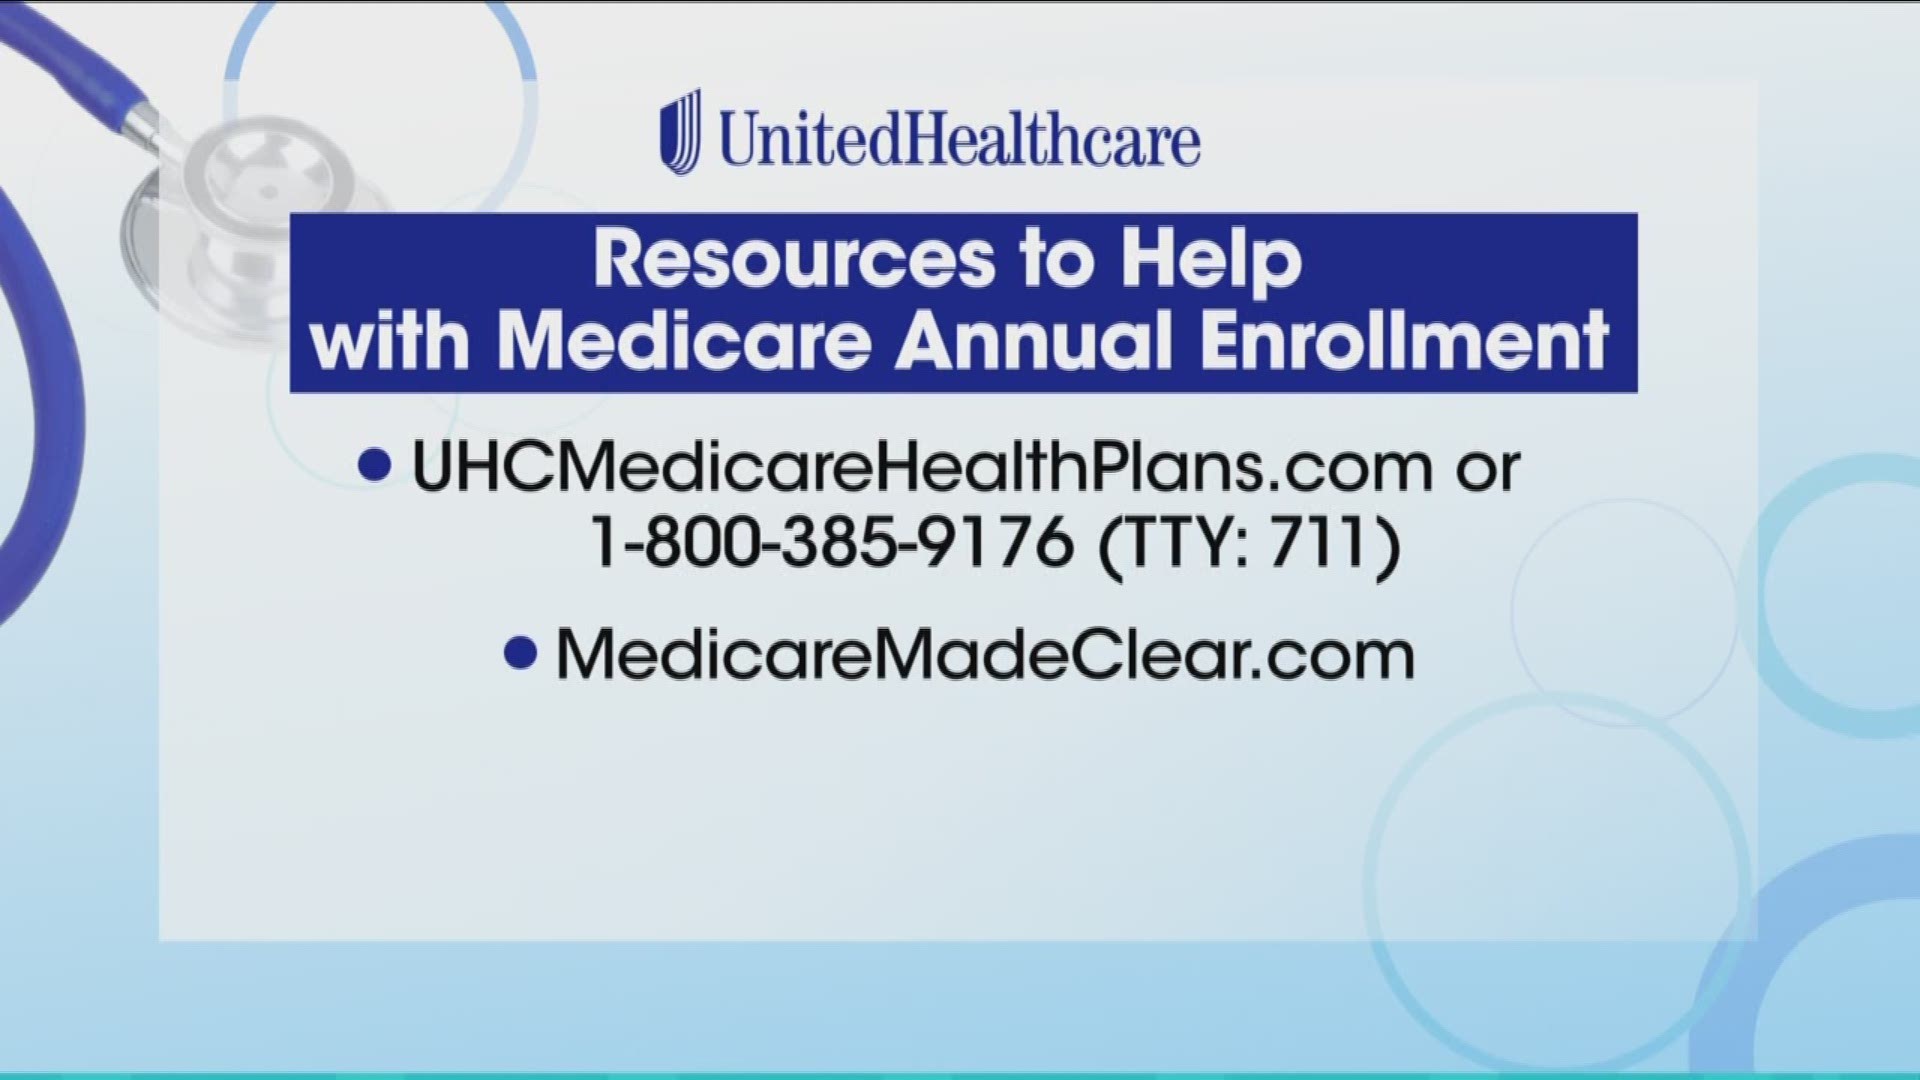 Resources to help with Medicare Annual Enrollment with UnitedHealthcare